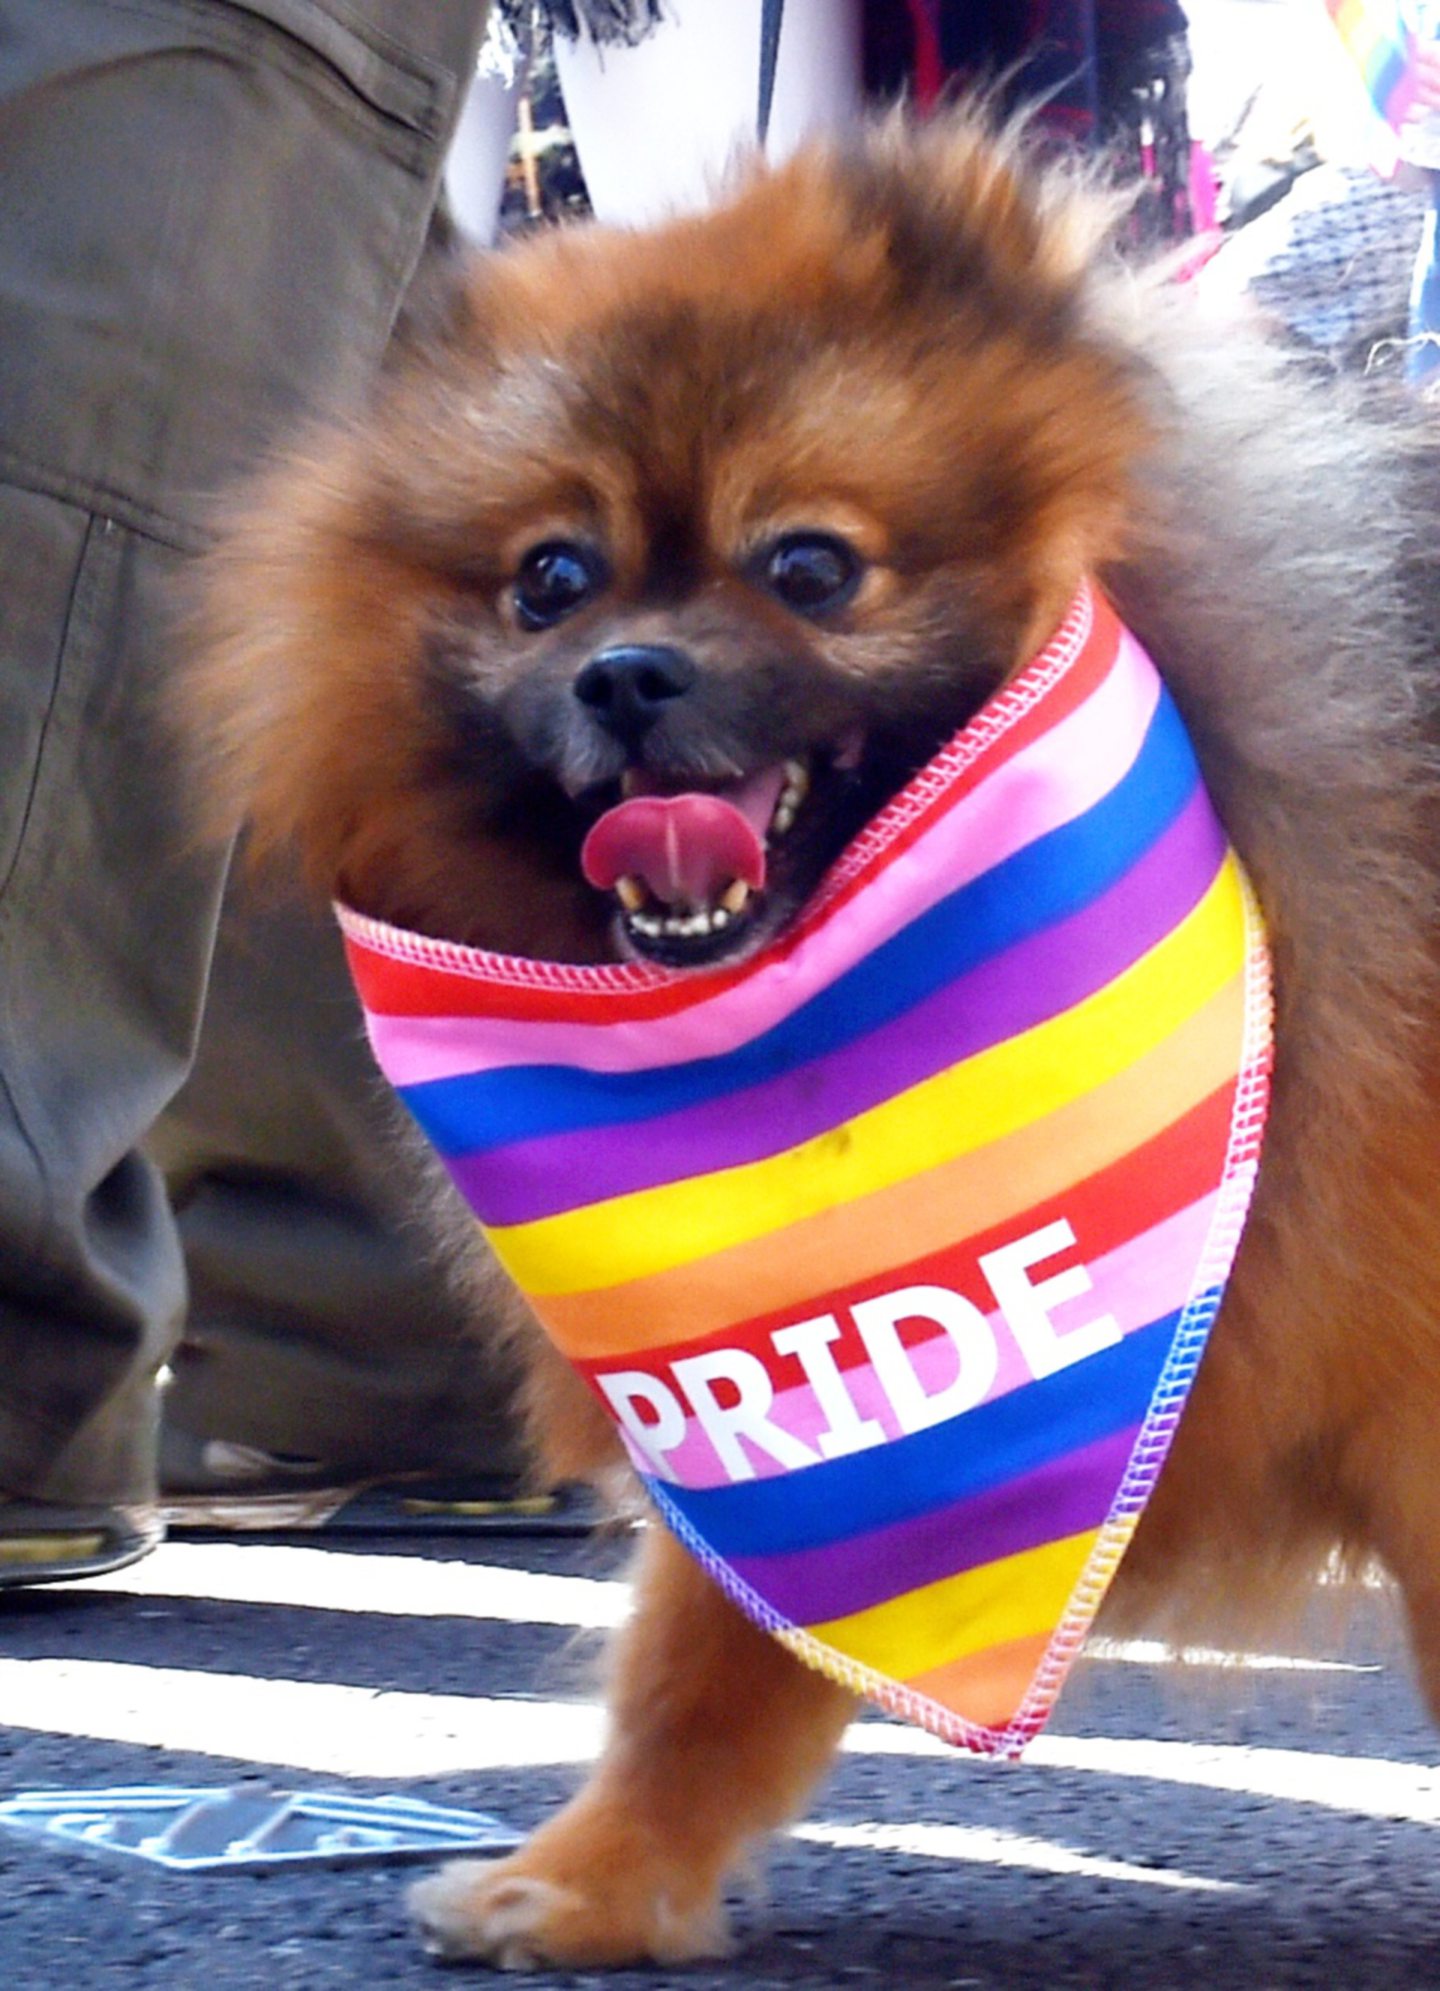 Plenty of dogs were seen decked out in rainbow coloured collars.